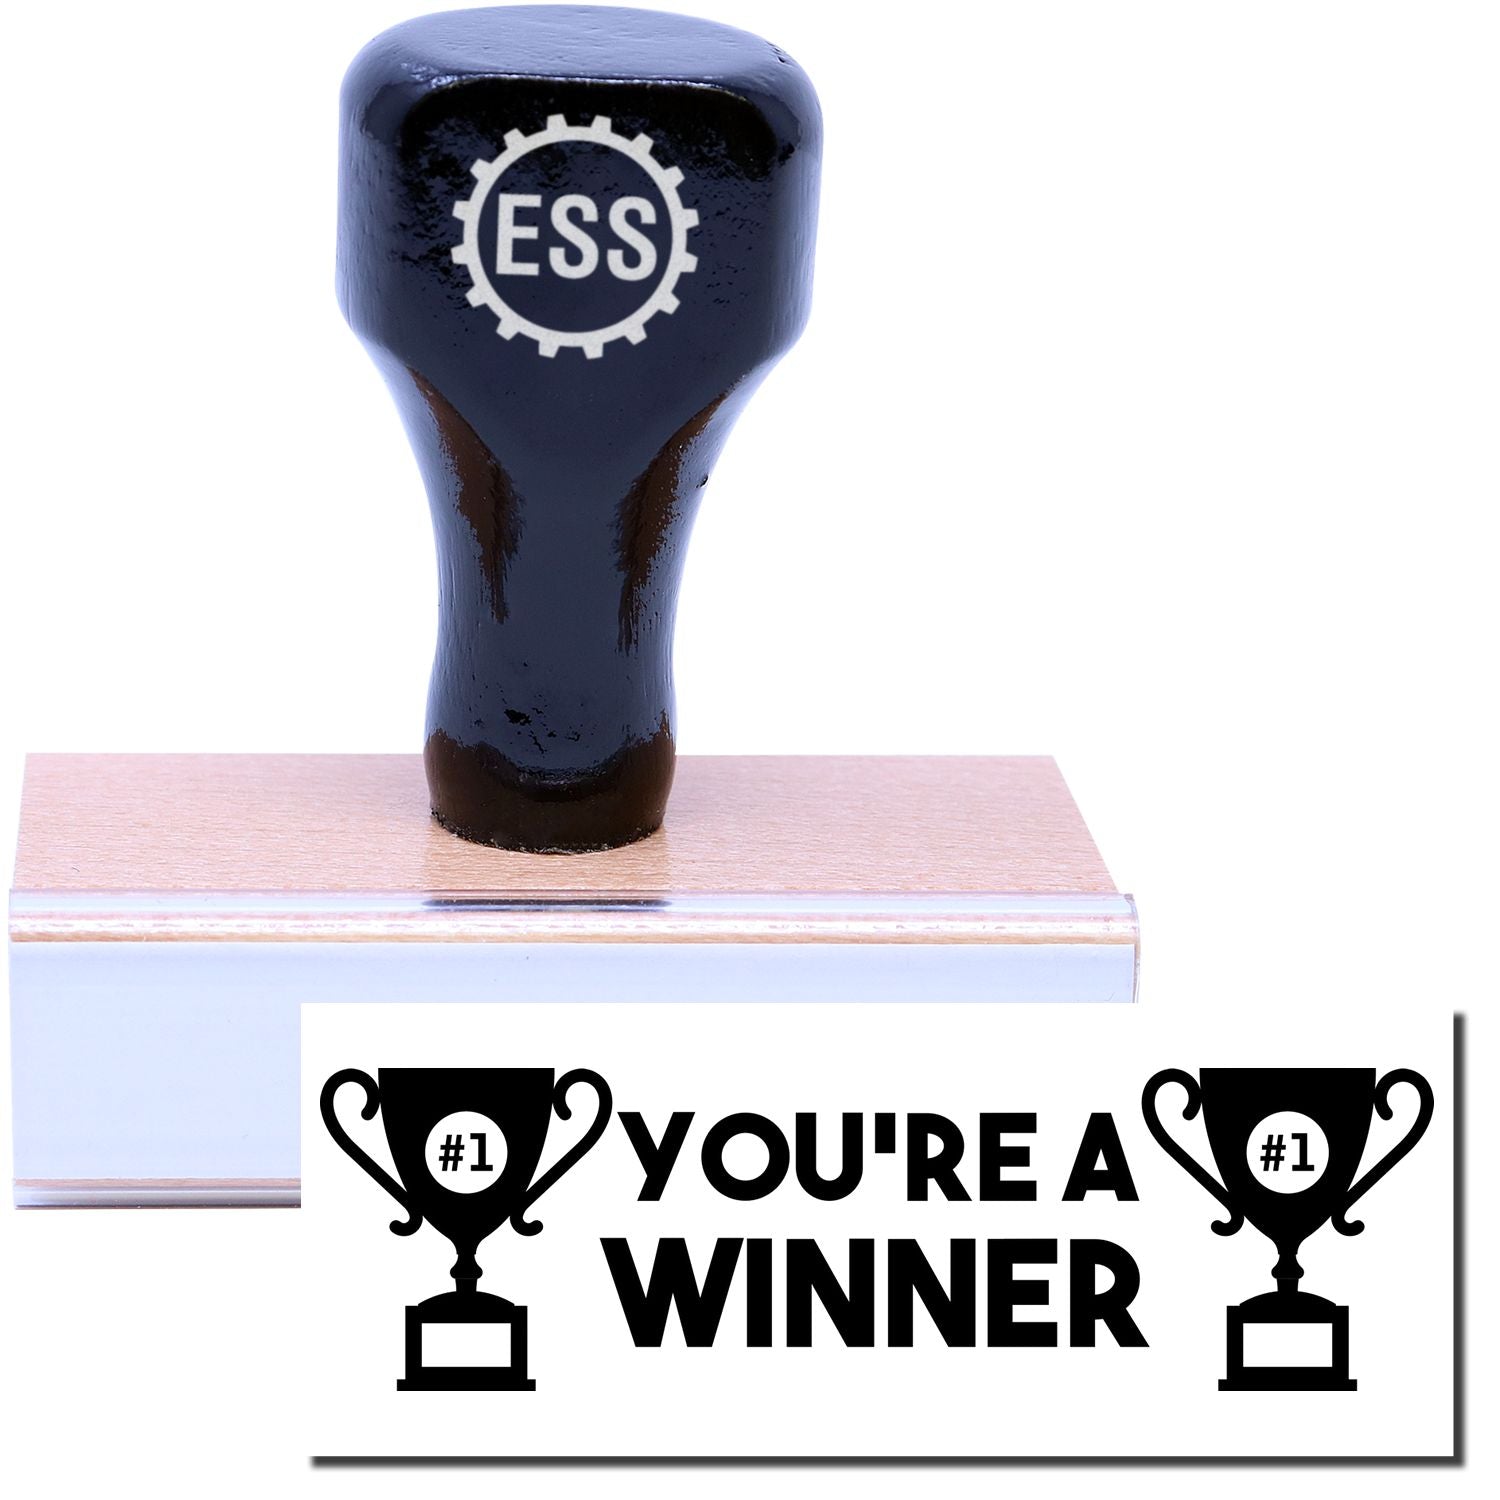 A stock office rubber stamp with a stamped image showing how the text "YOU'RE A WINNER" in bold font and images of a trophy with #1 inside is displayed after stamping.